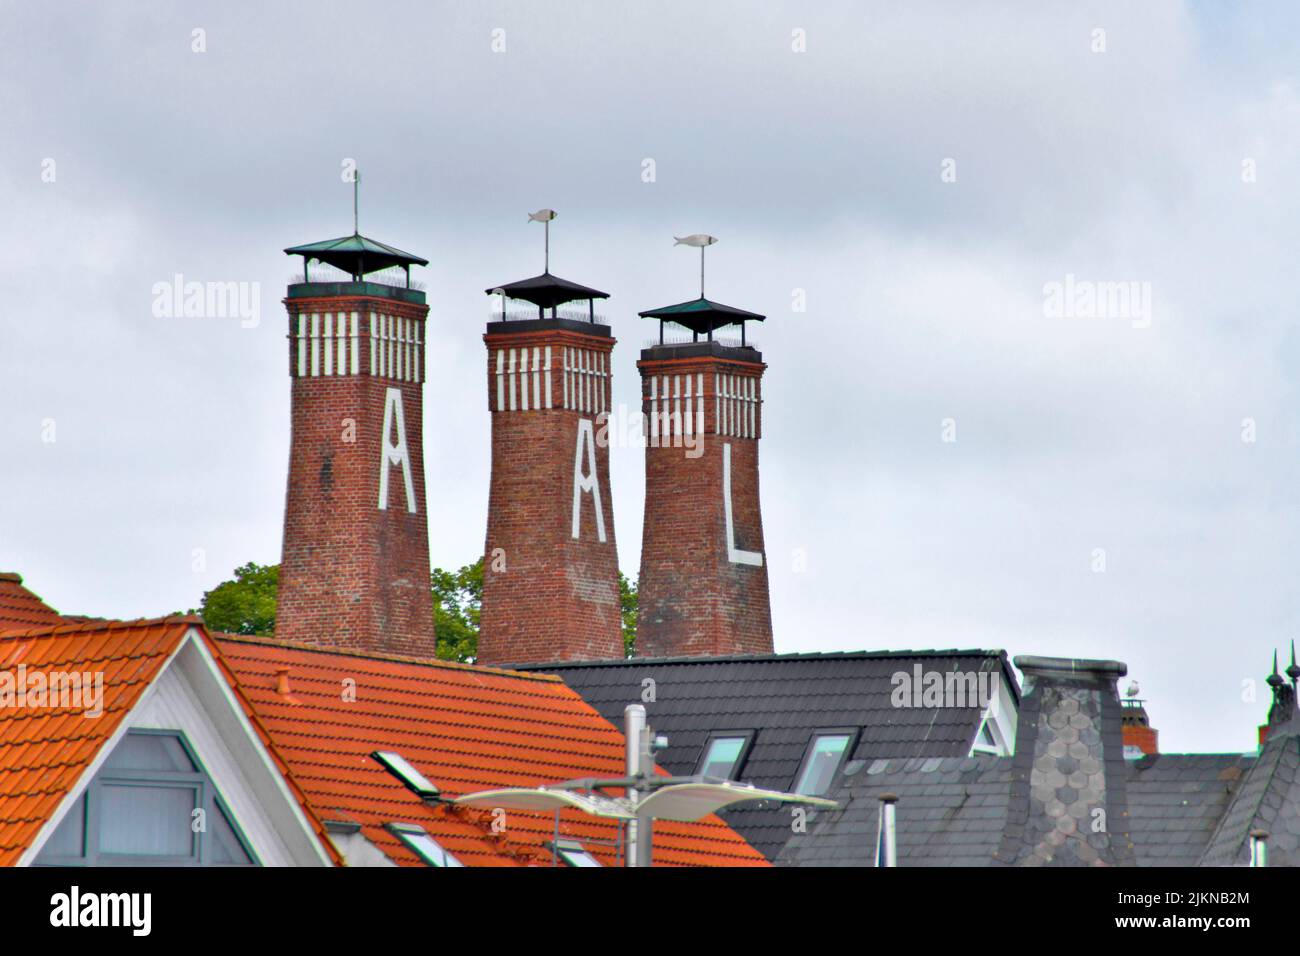 Three chimneys of a fish ingress in Kappeln at the Schlei in Northern Germany Stock Photo